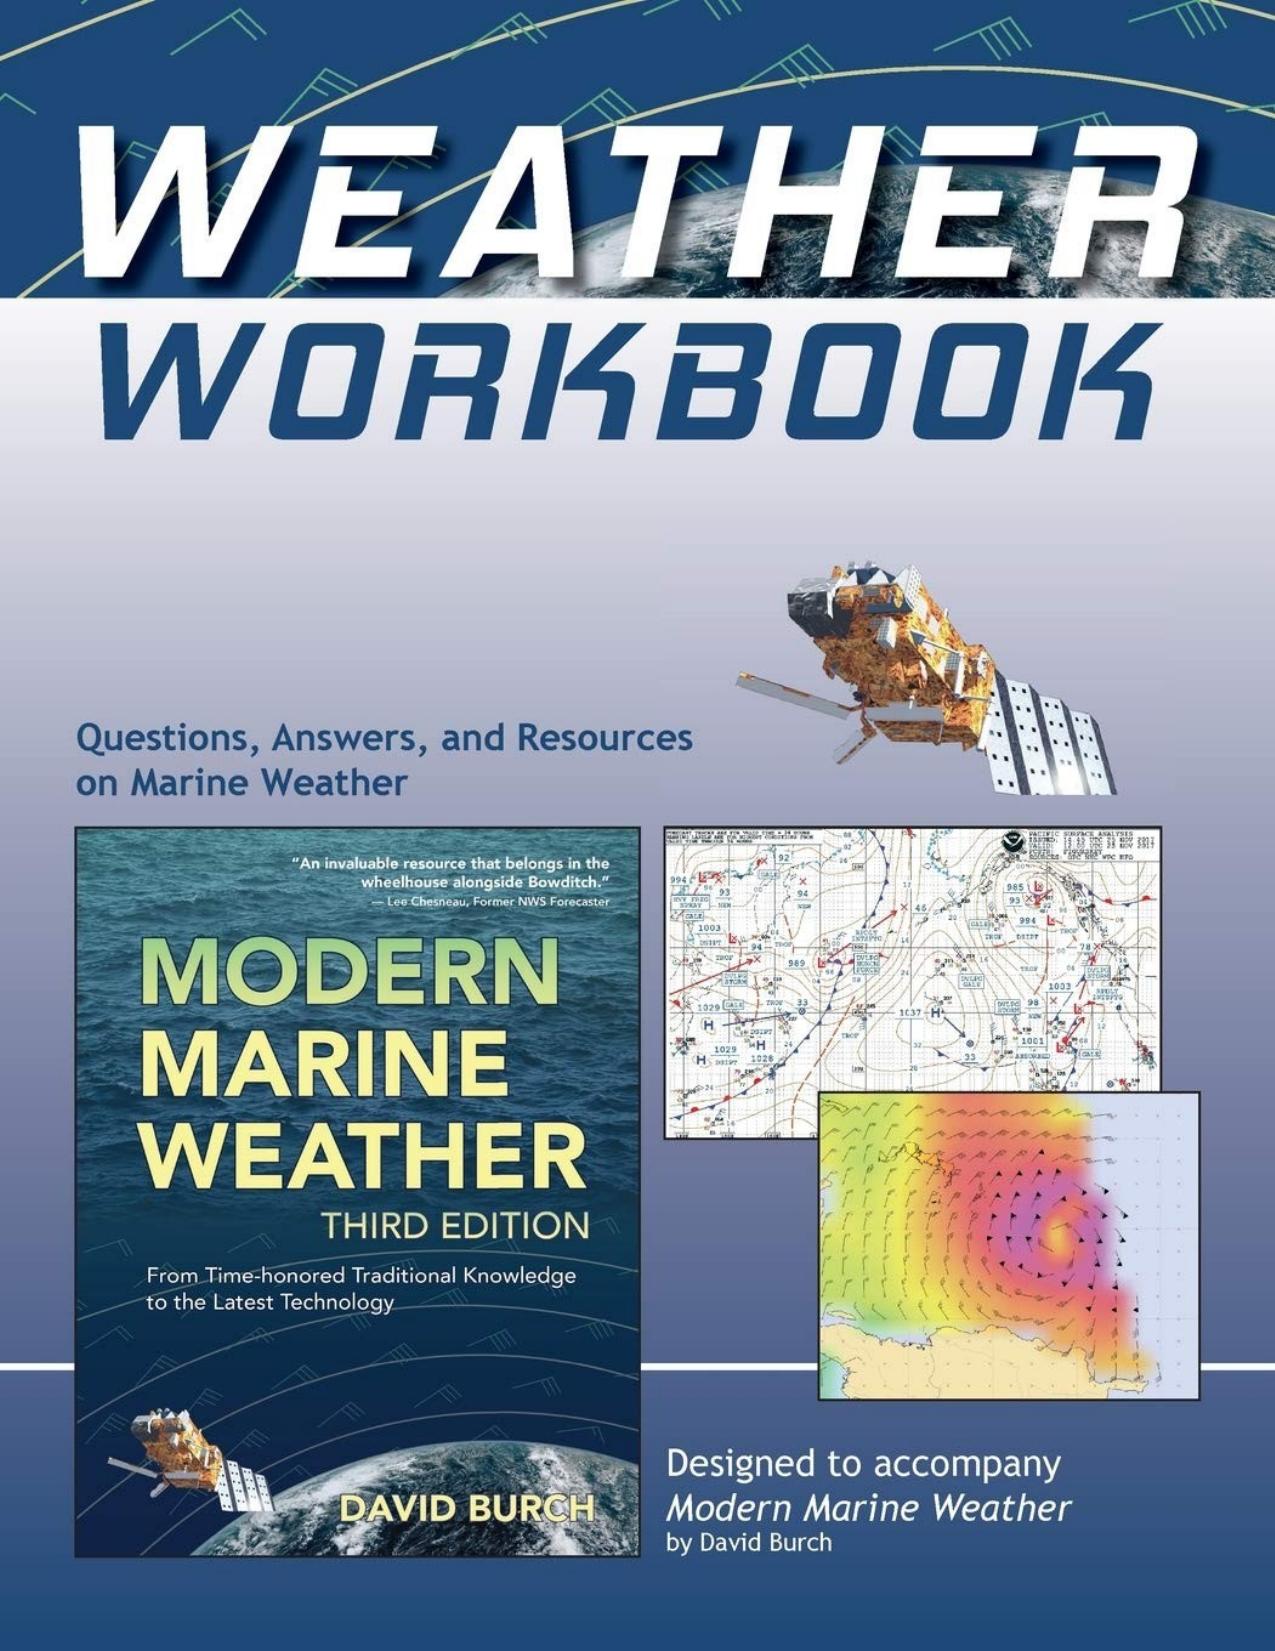 Weather Workbook: Questions, Answers, and Resources on Marine Weather by David Burch